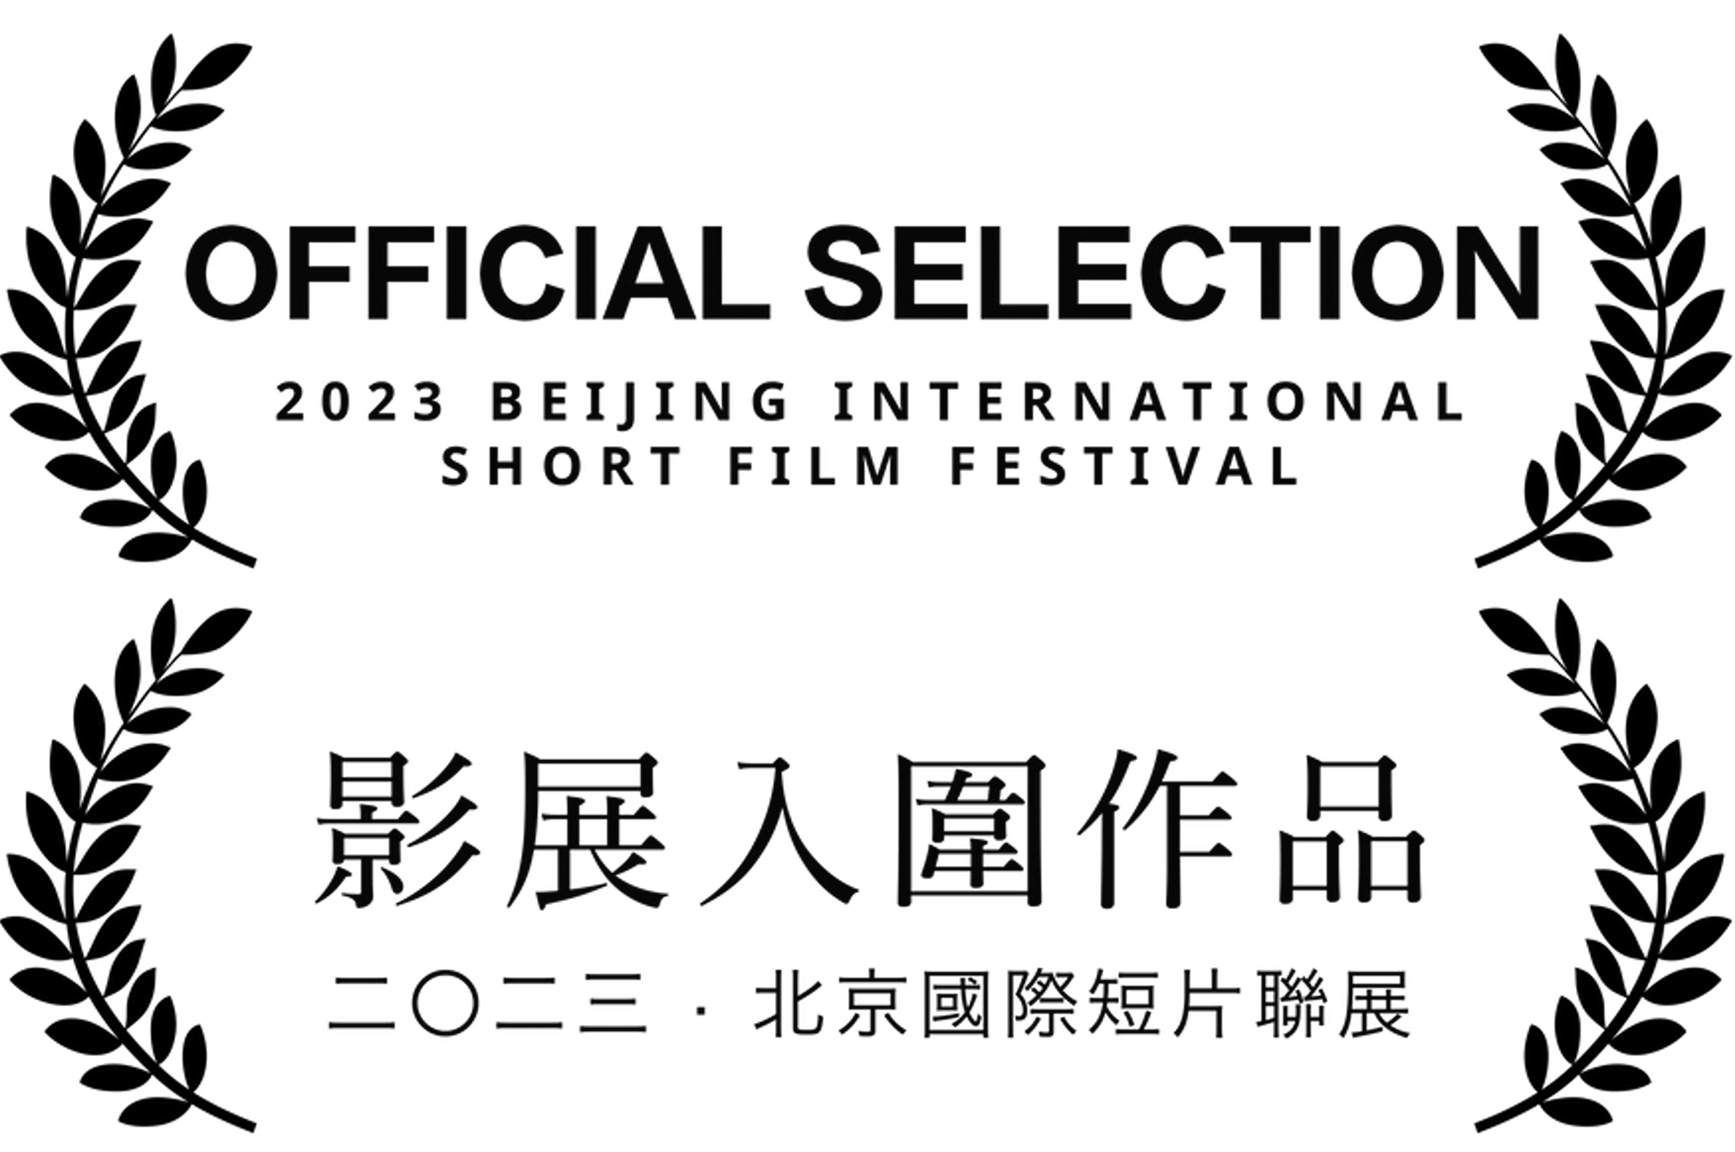 OFFICIAL SELECTION - Beijing_duplo.png